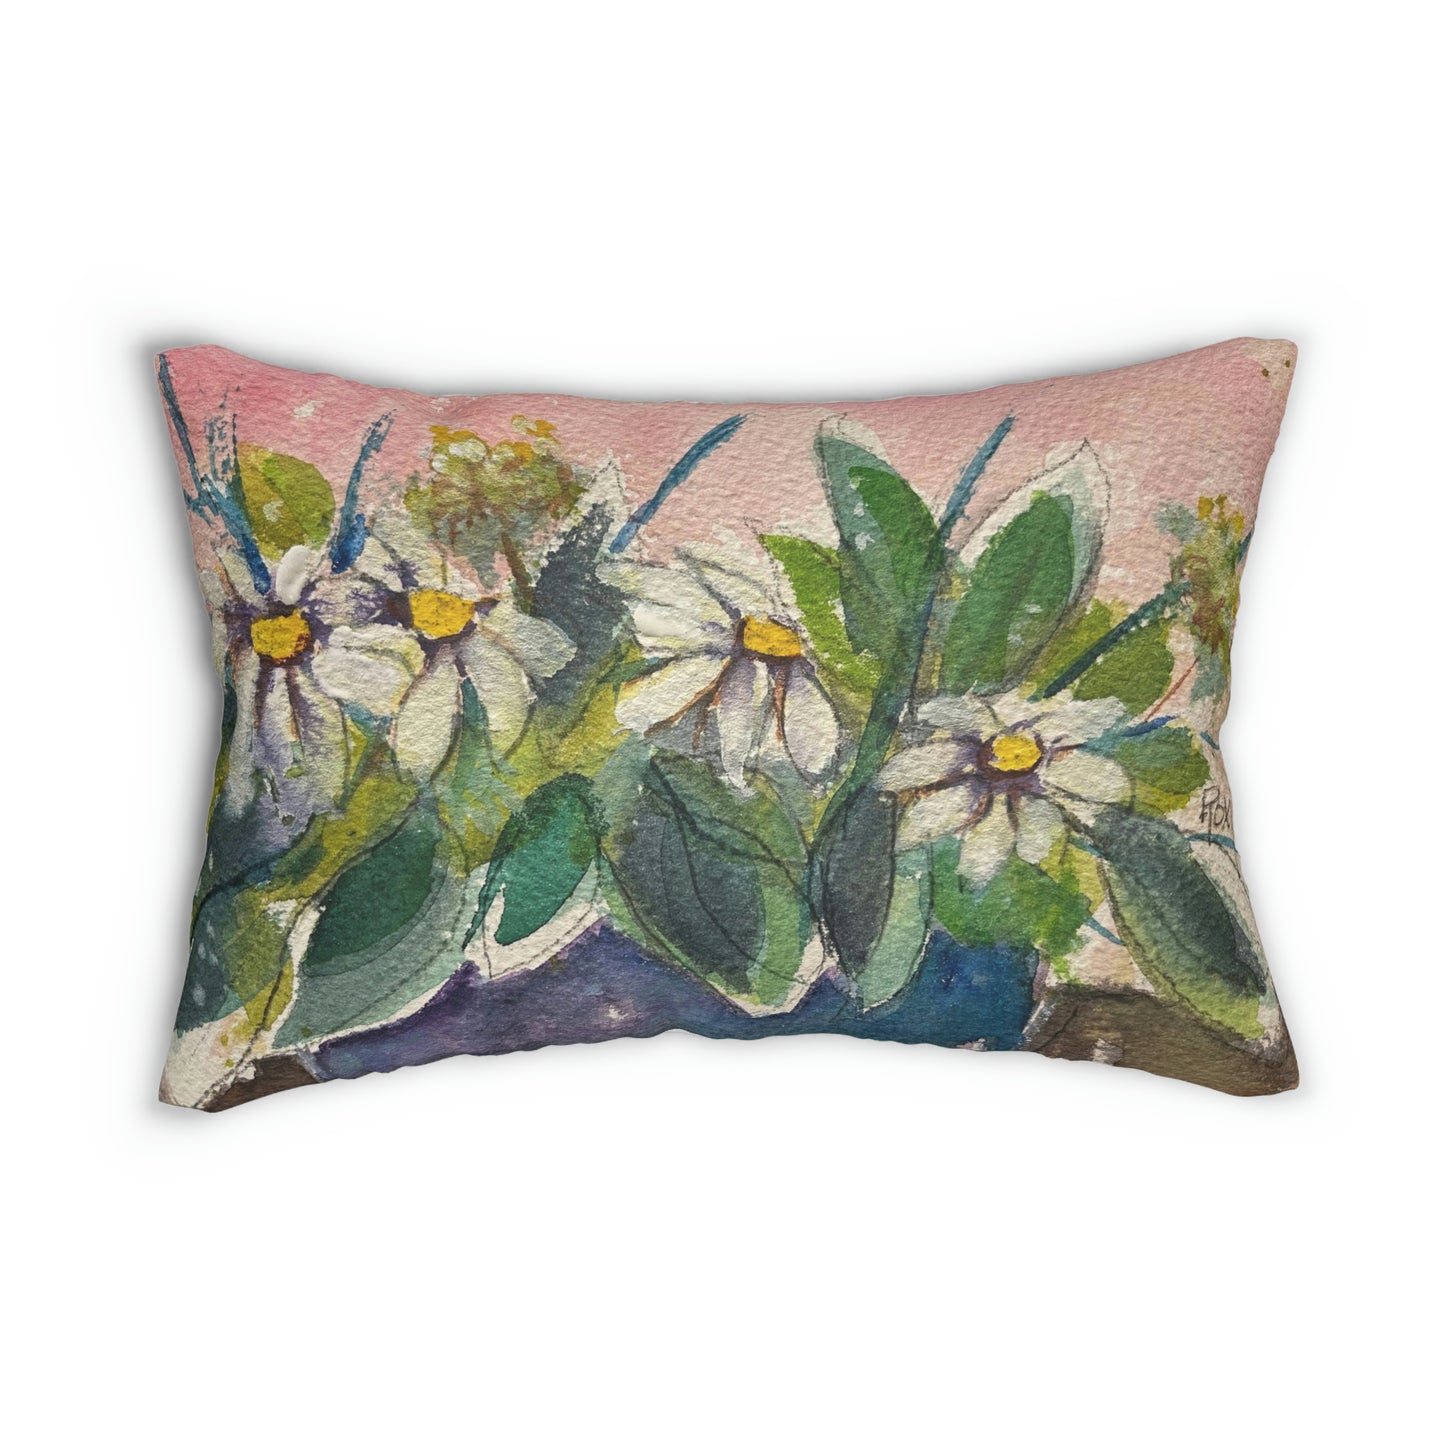 Temecula Lumbar Pillow featuring "Daisies on the Table" Roxy Rich Fine Art and "Temecula"